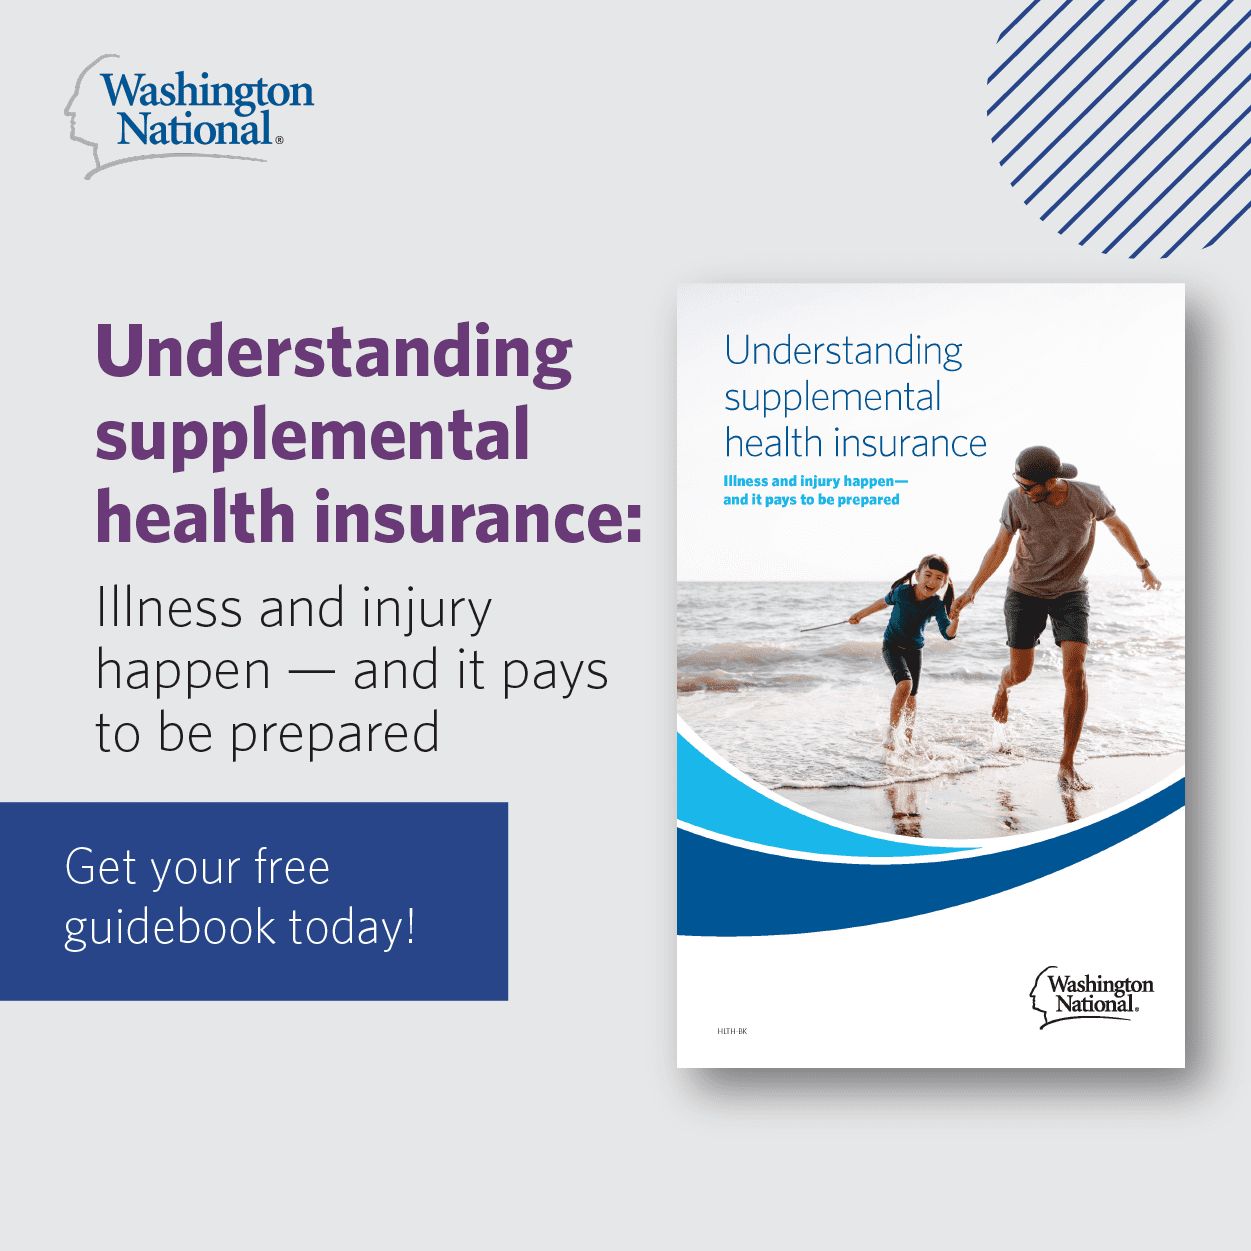 A downloadable guide to understanding supplemental health insurance.